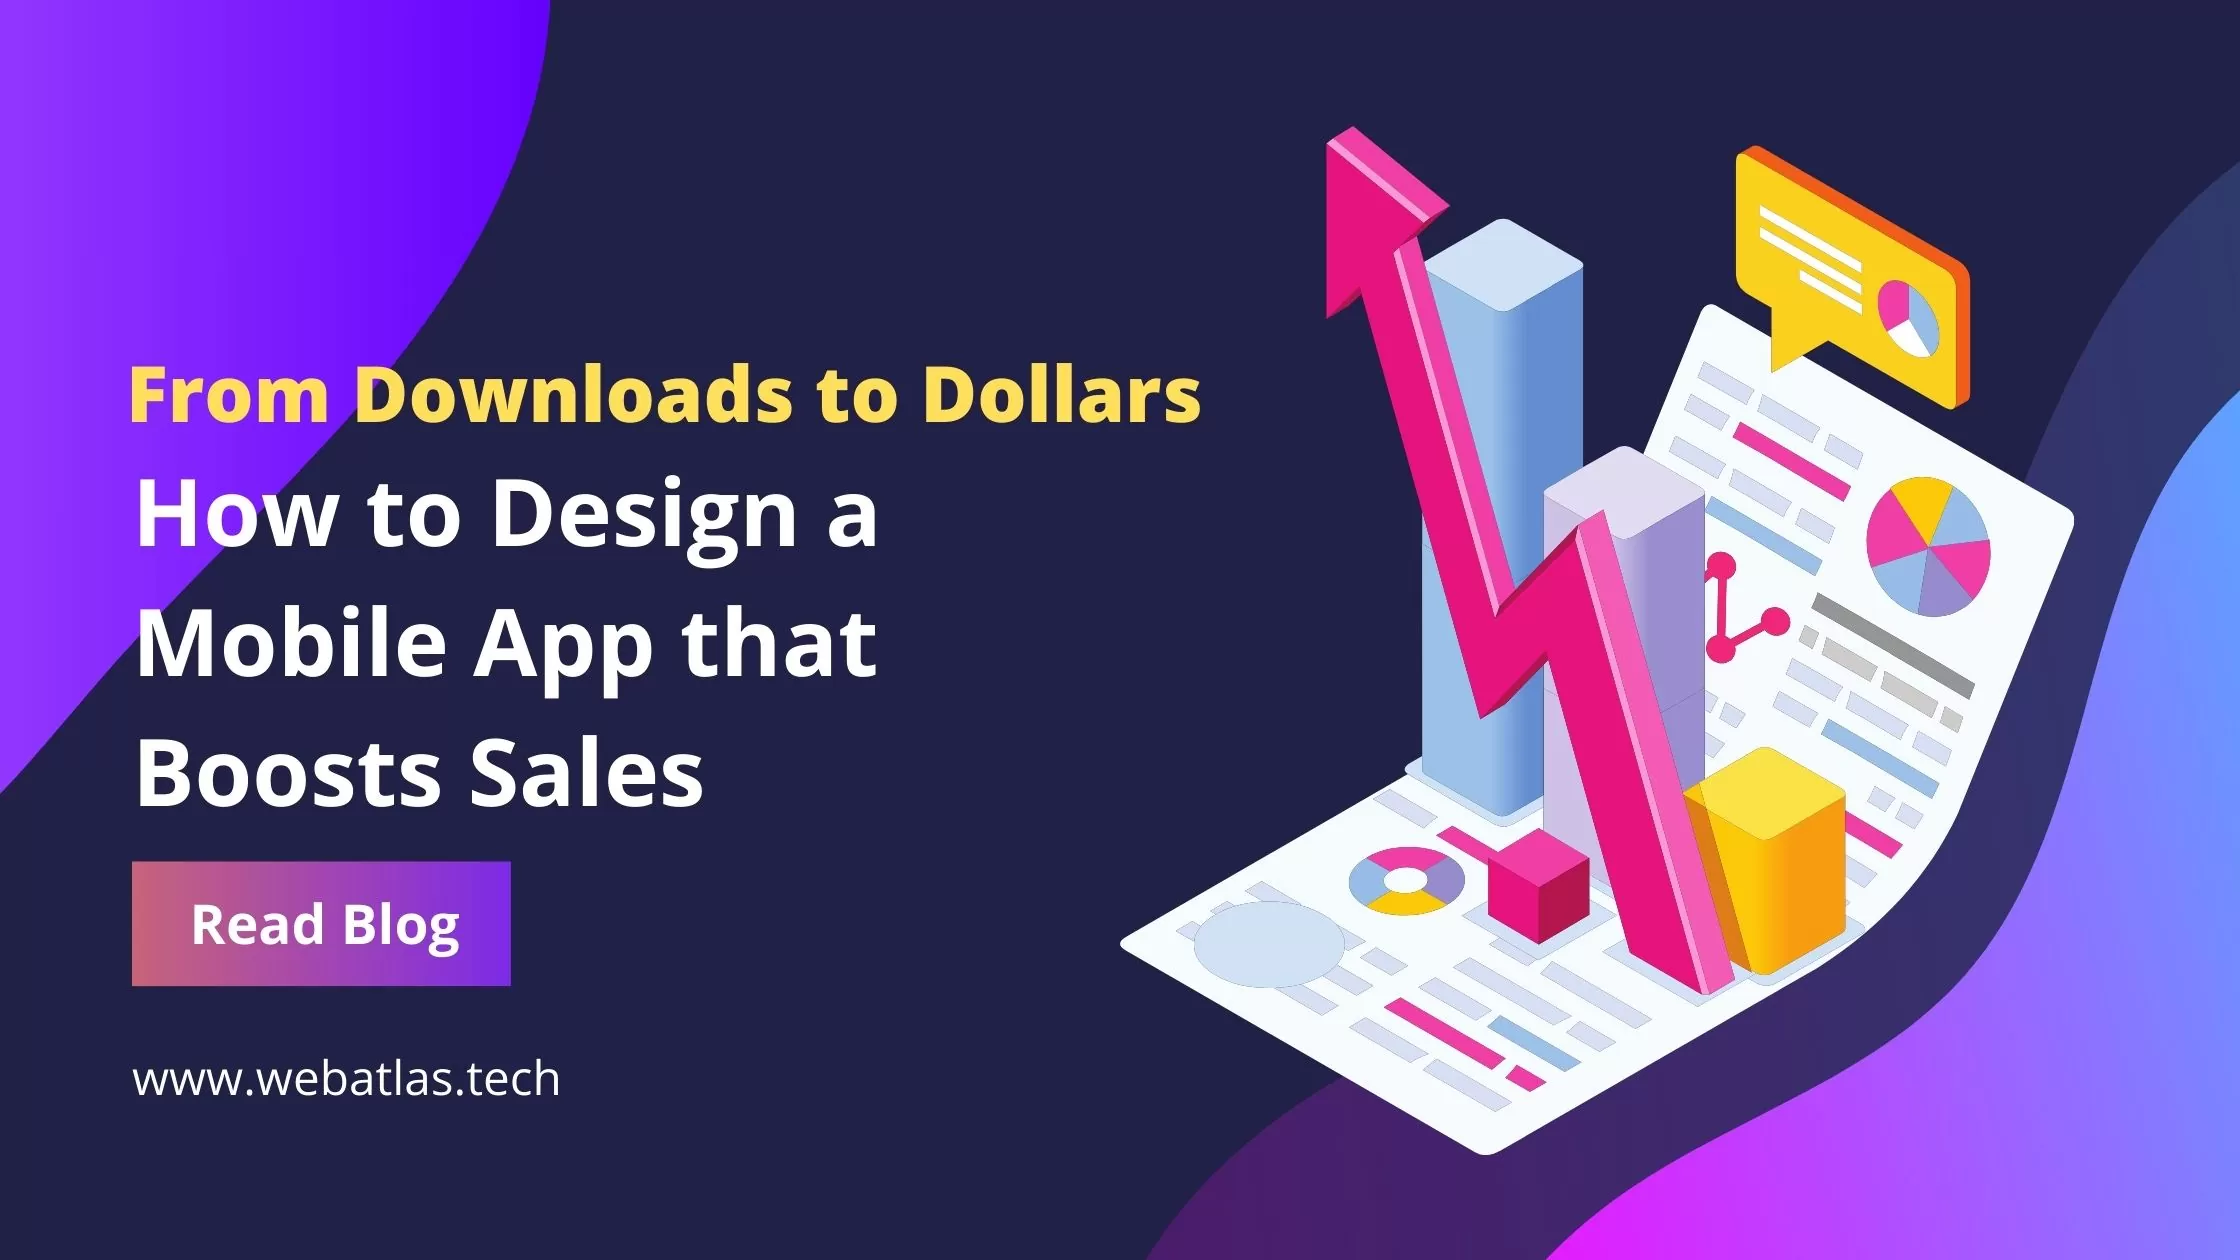 Build a Mobile App That Drives Sales and Conversions